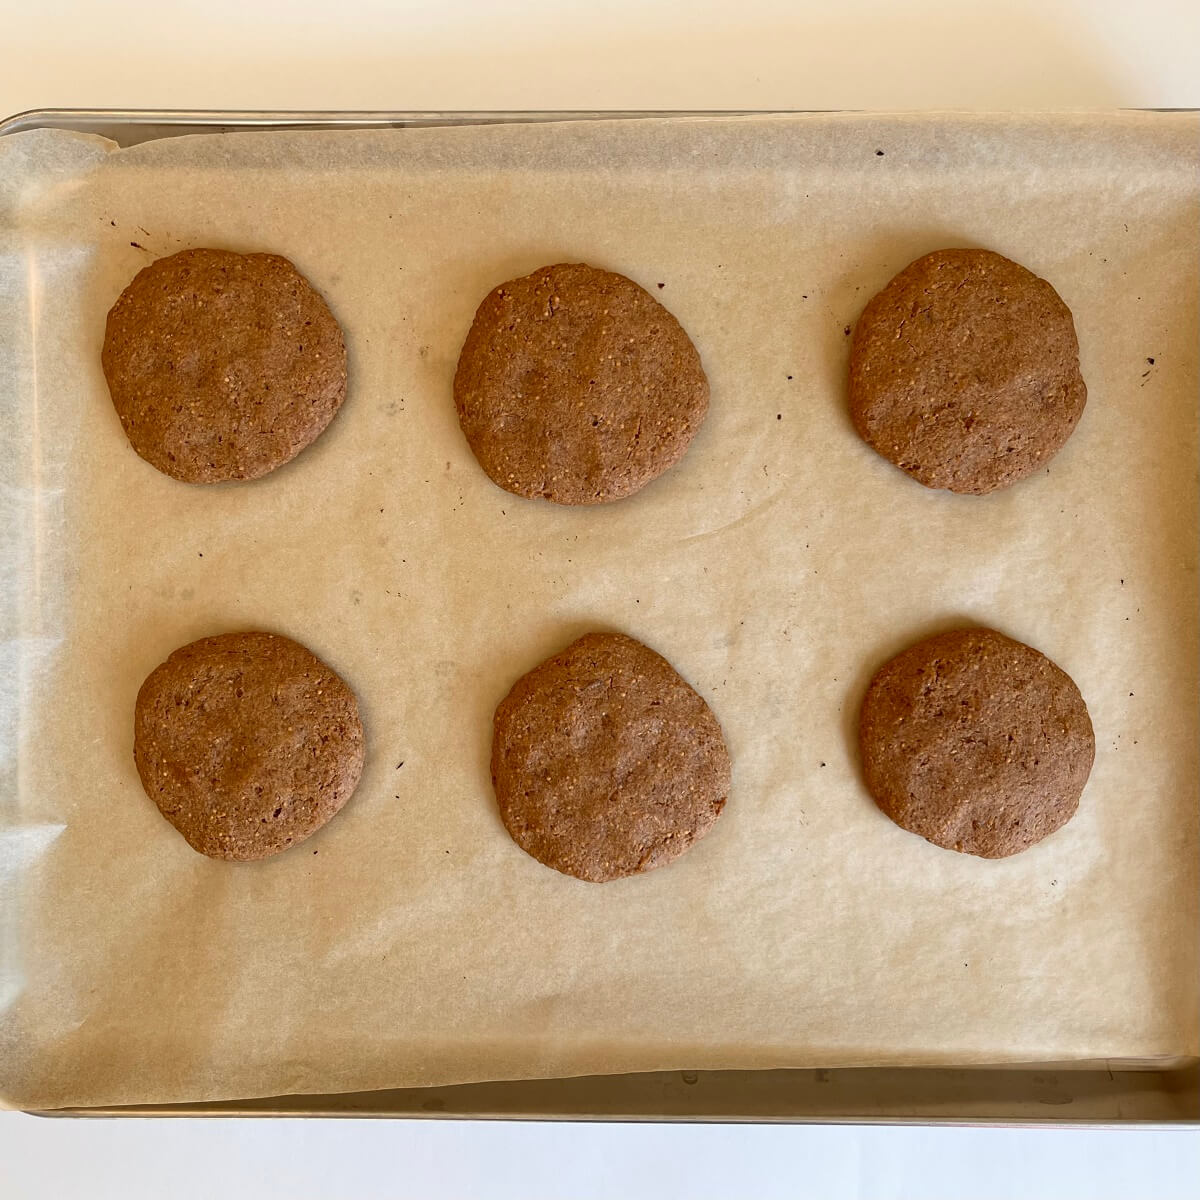 Baked cookies made with figs on a sheet pan lined with parchment paper.